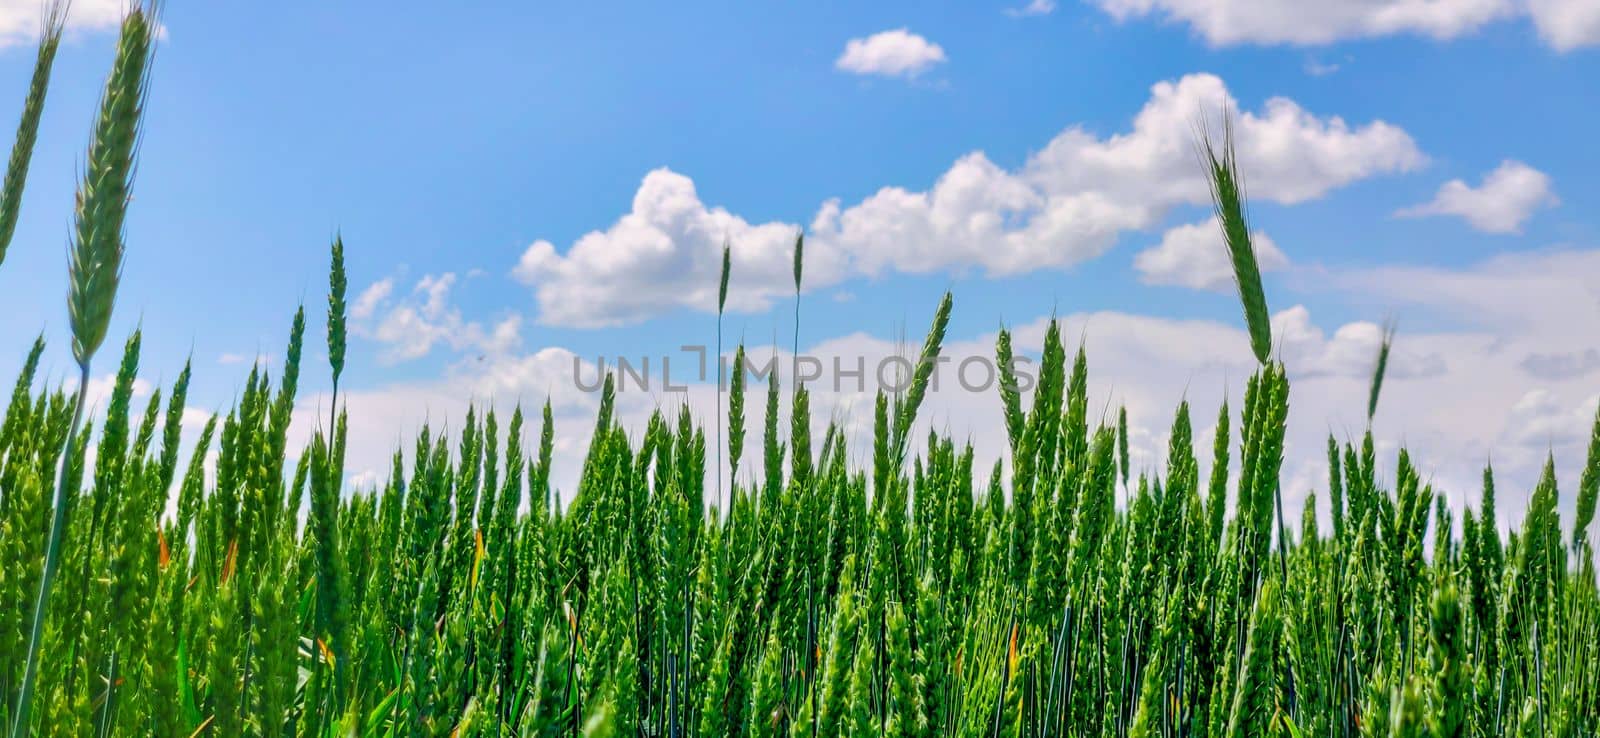 Green field barley or wheat. Full ripe spikelets. Bright sunny summer day in the field. download image by igor010